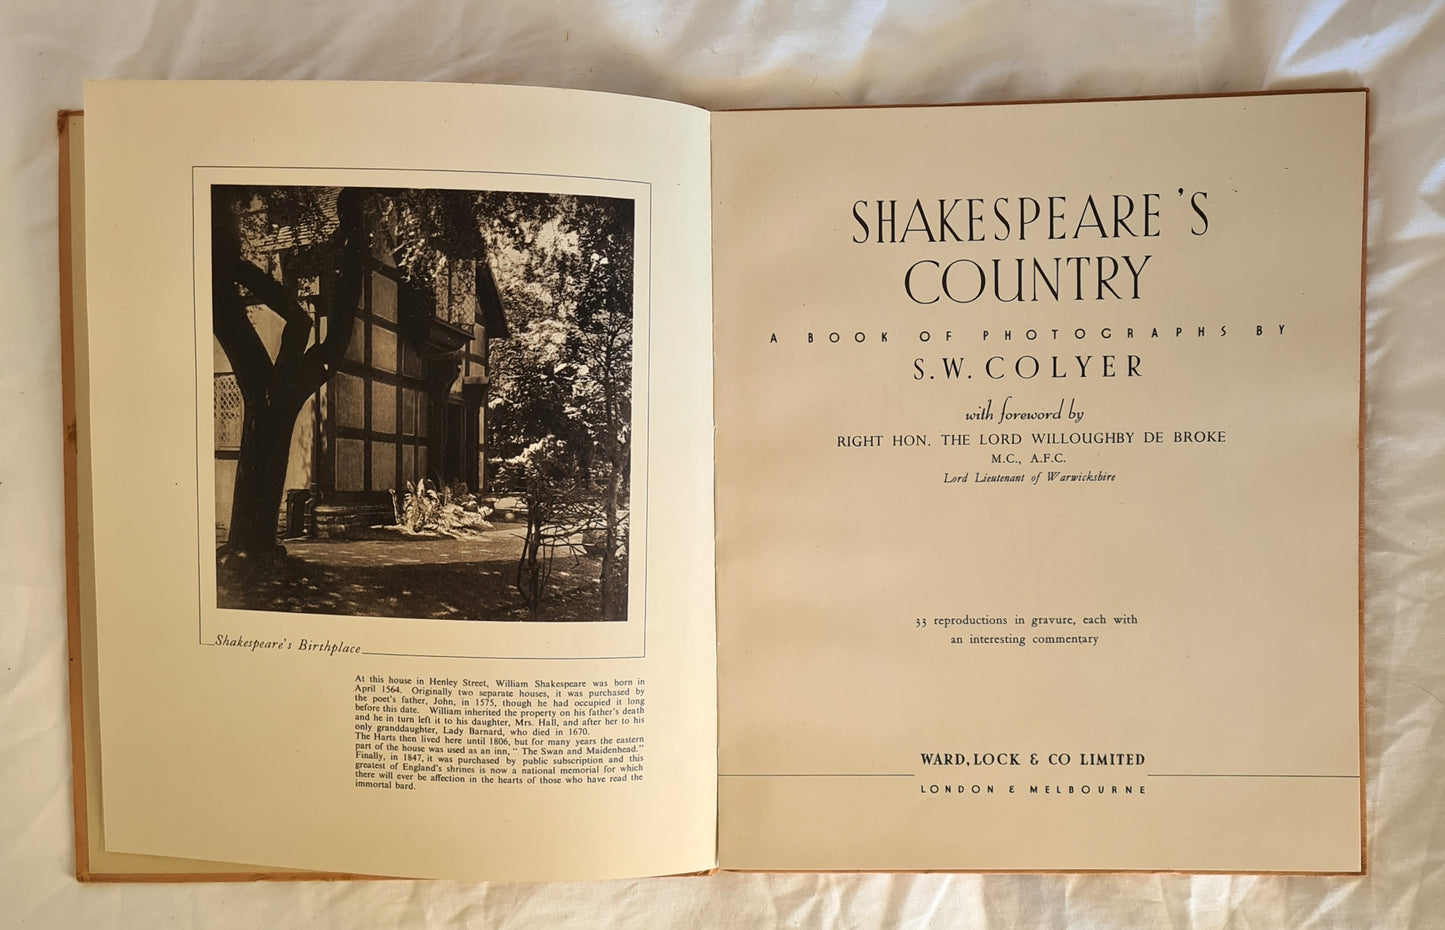 Shakespeare’s Country by S. W. Colyer